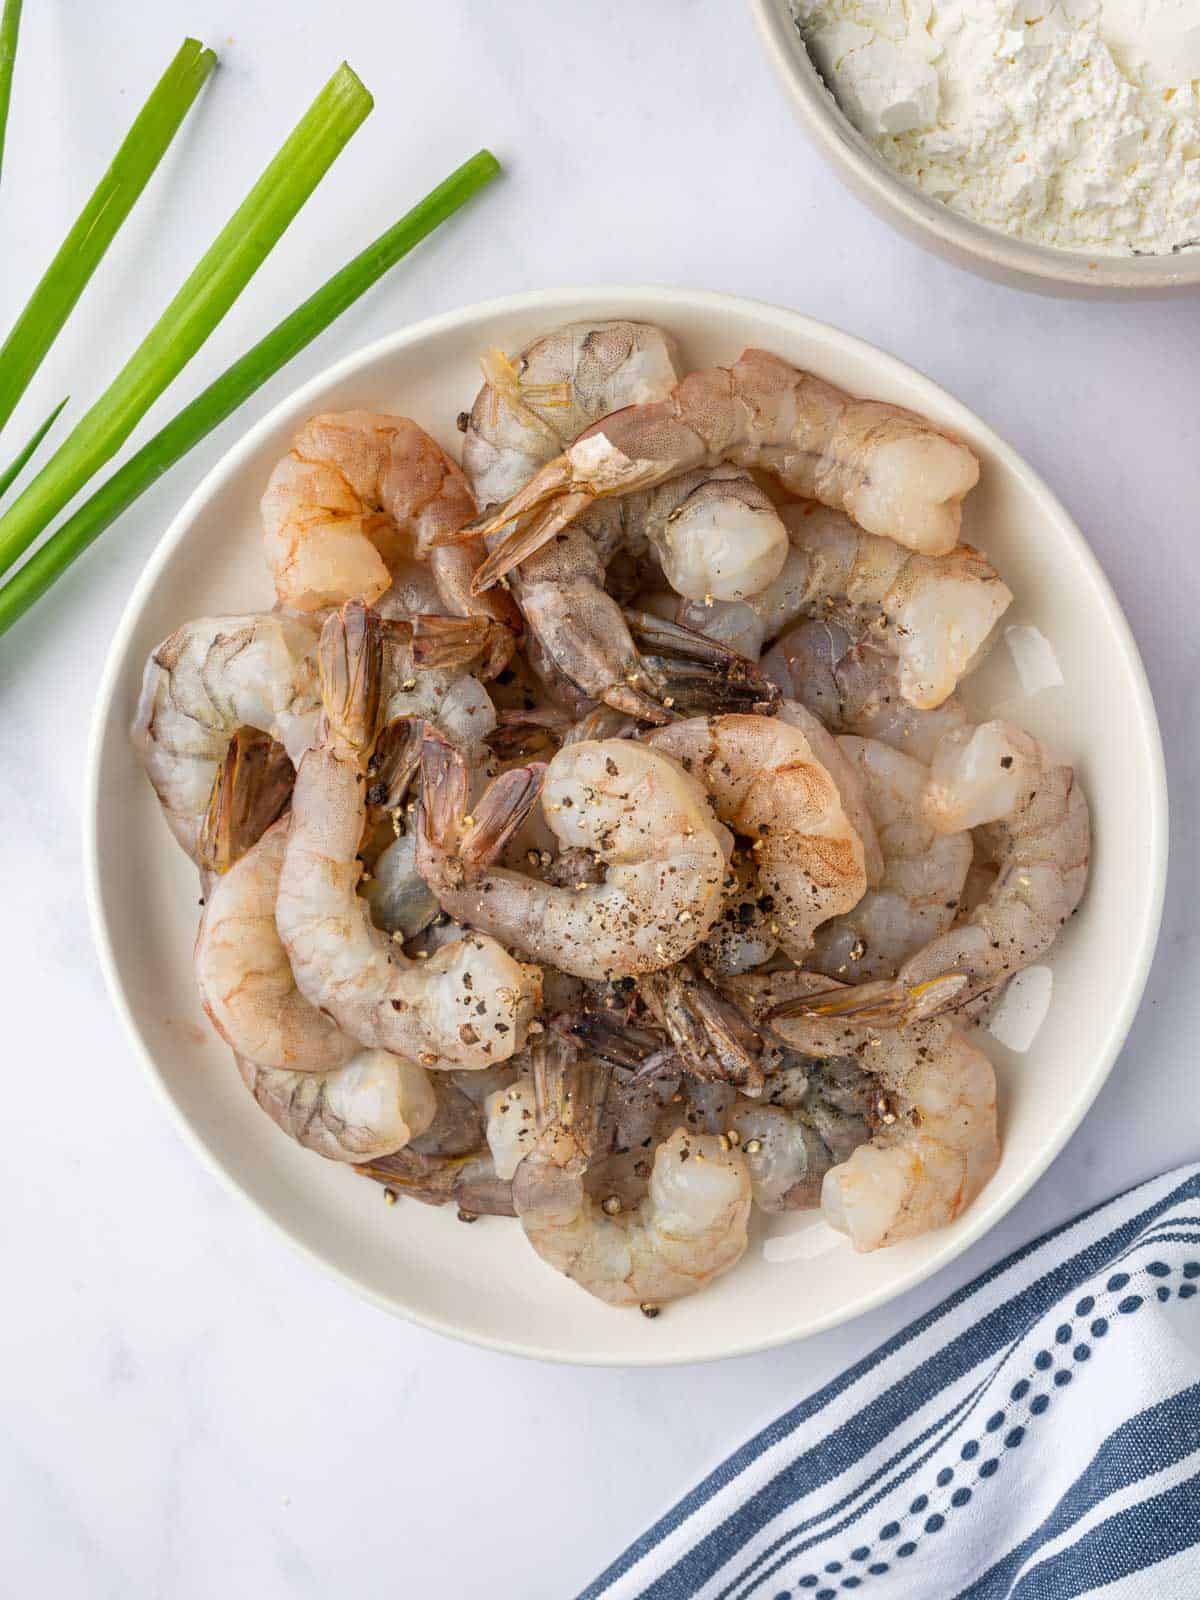 Raw shrimp is seasoned with salt and pepper in a bowl.